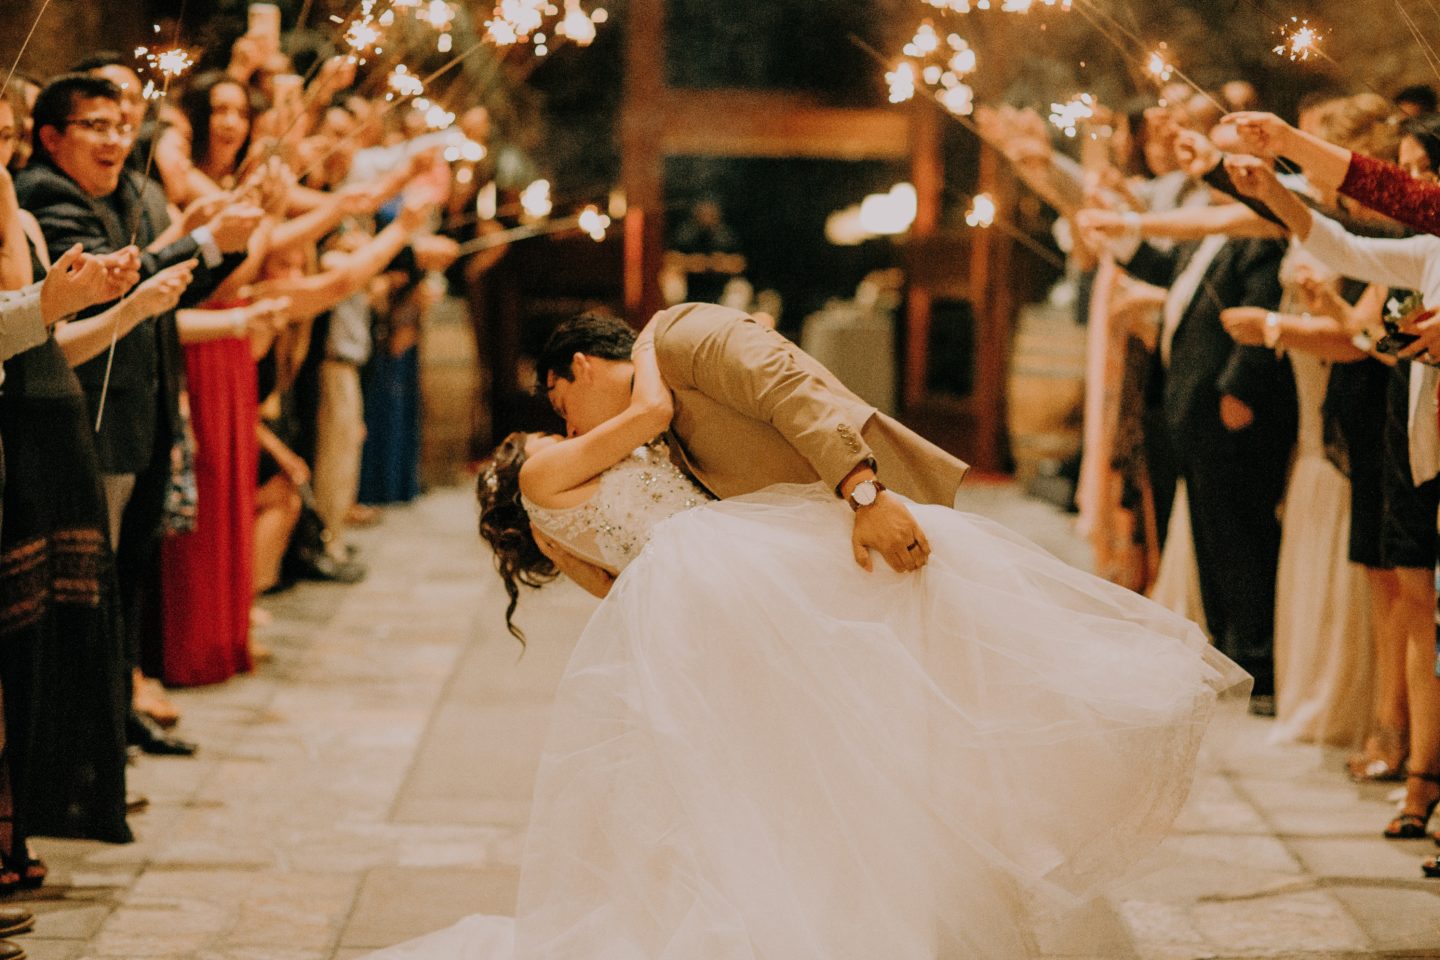 Wedding Entertainment Ideas; How To Incorporate Your Hidden Talents